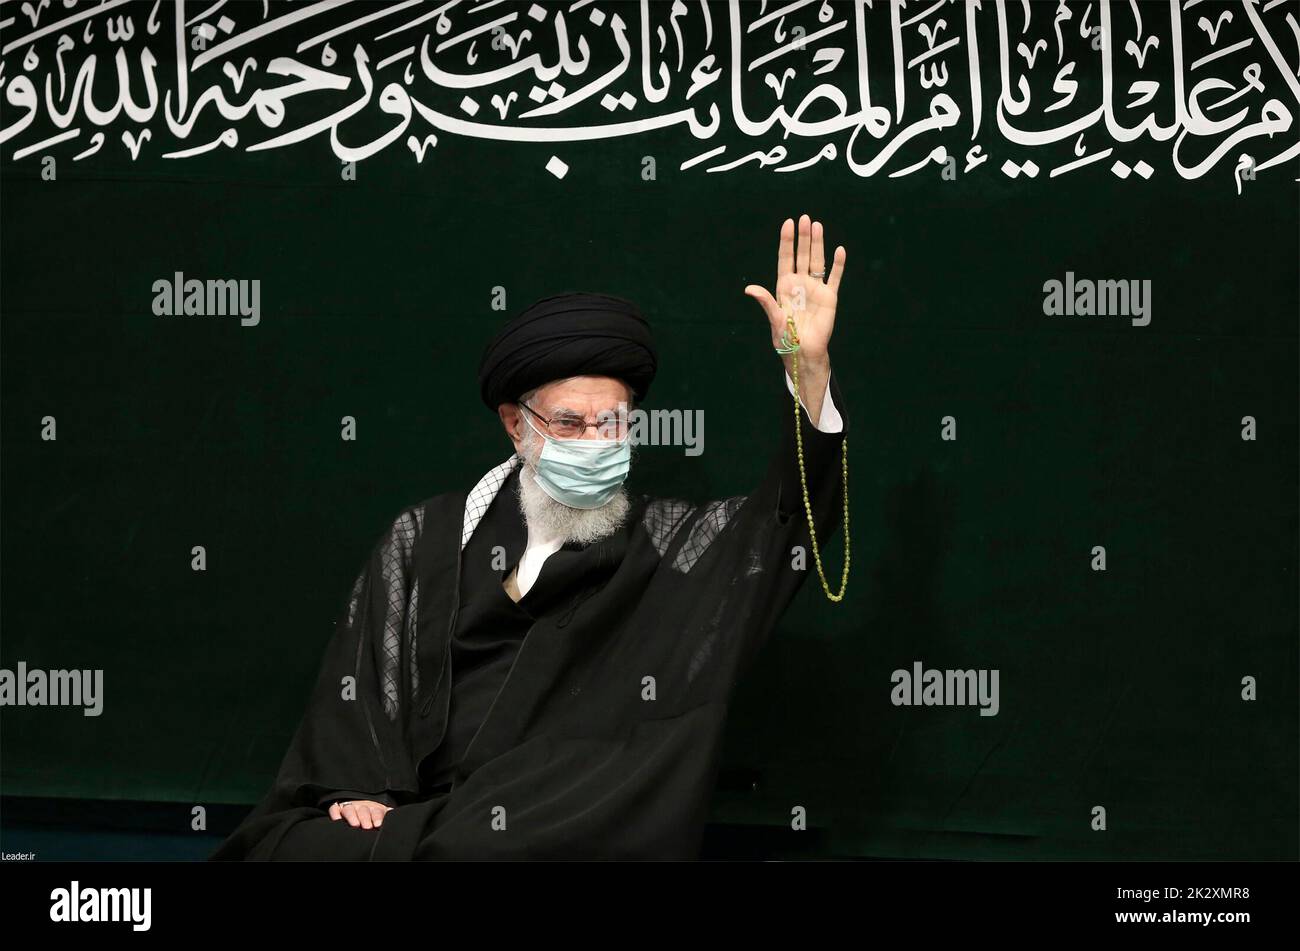 Tehran, Iran. 17th Sep, 2022. Iranian Supreme Leader Ayatollah Ali Khamenei waves during a ceremony on the occasion of Arbaeen, September 17, 2022 in Tehran, Iran. Credit: Handout/Office of the Iranian Supreme Leader/Alamy Live News Stock Photo